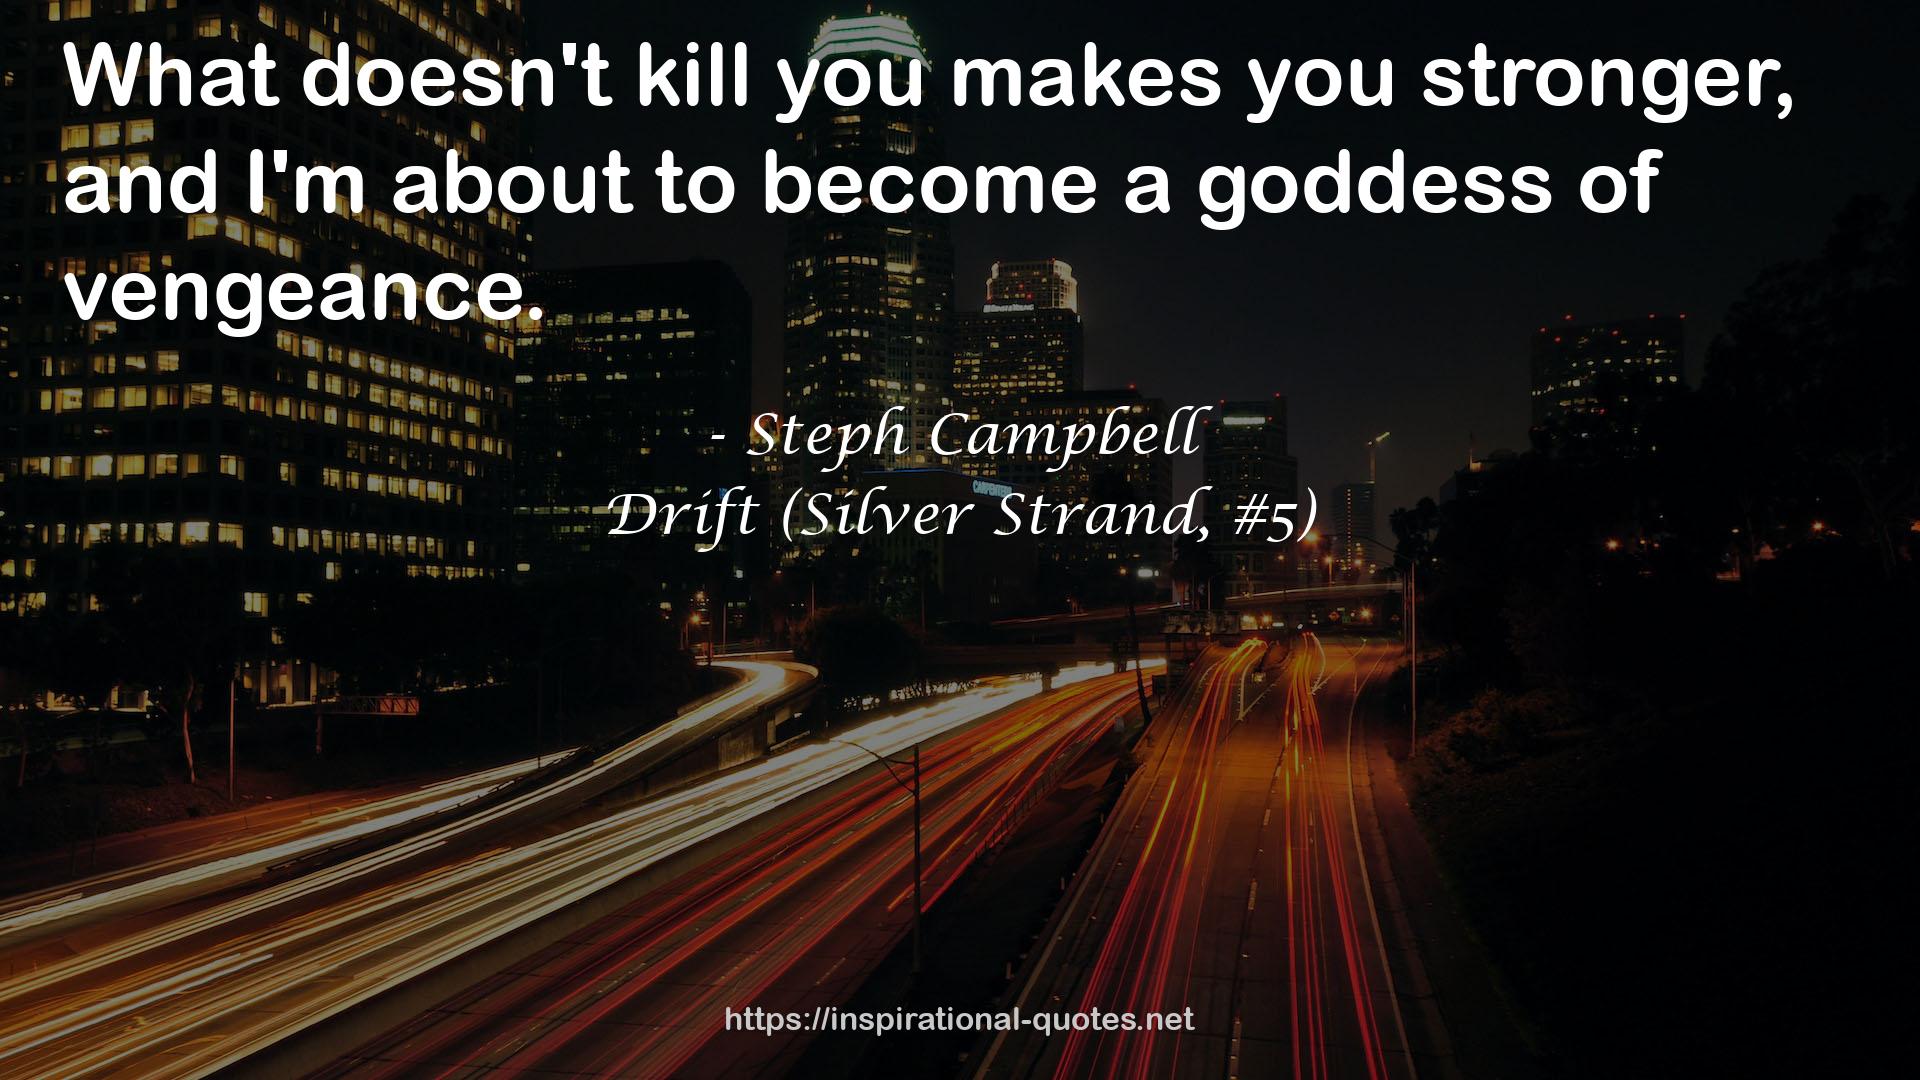 Drift (Silver Strand, #5) QUOTES